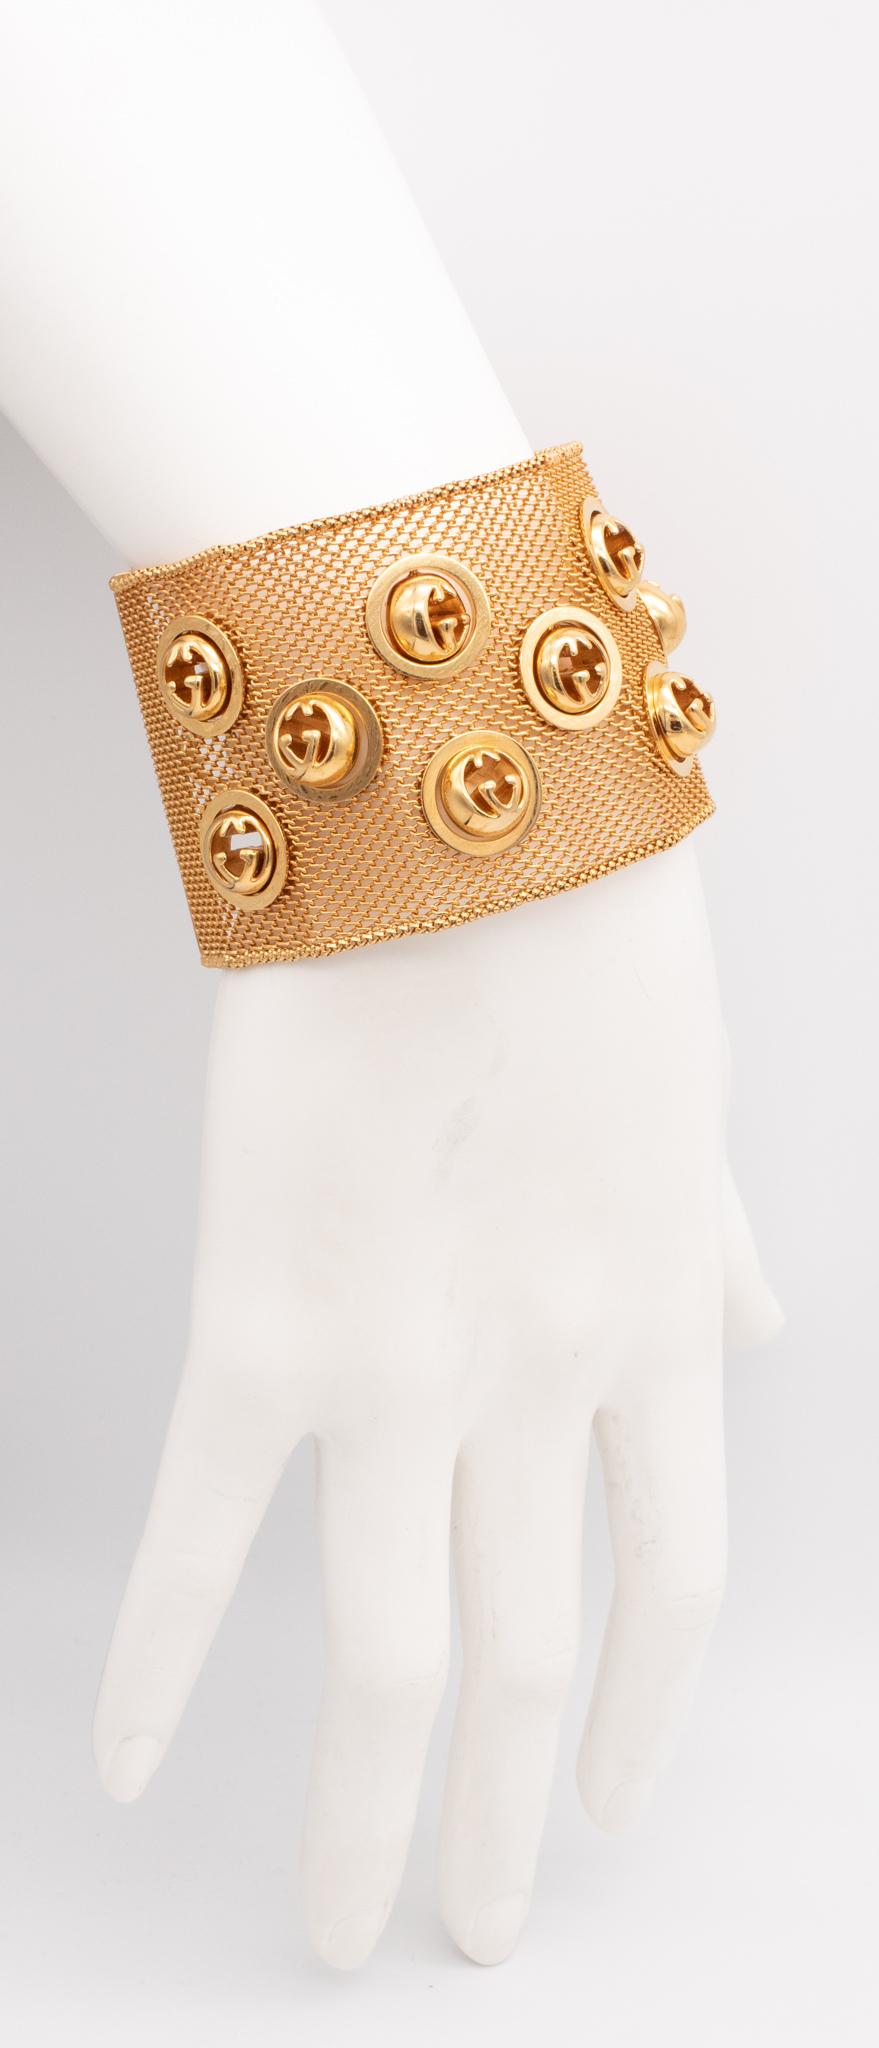 Retro Gucci Milan 1980 Flexible Bracelet With Kinetic Spheres Logo In 18Kt Yellow Gold